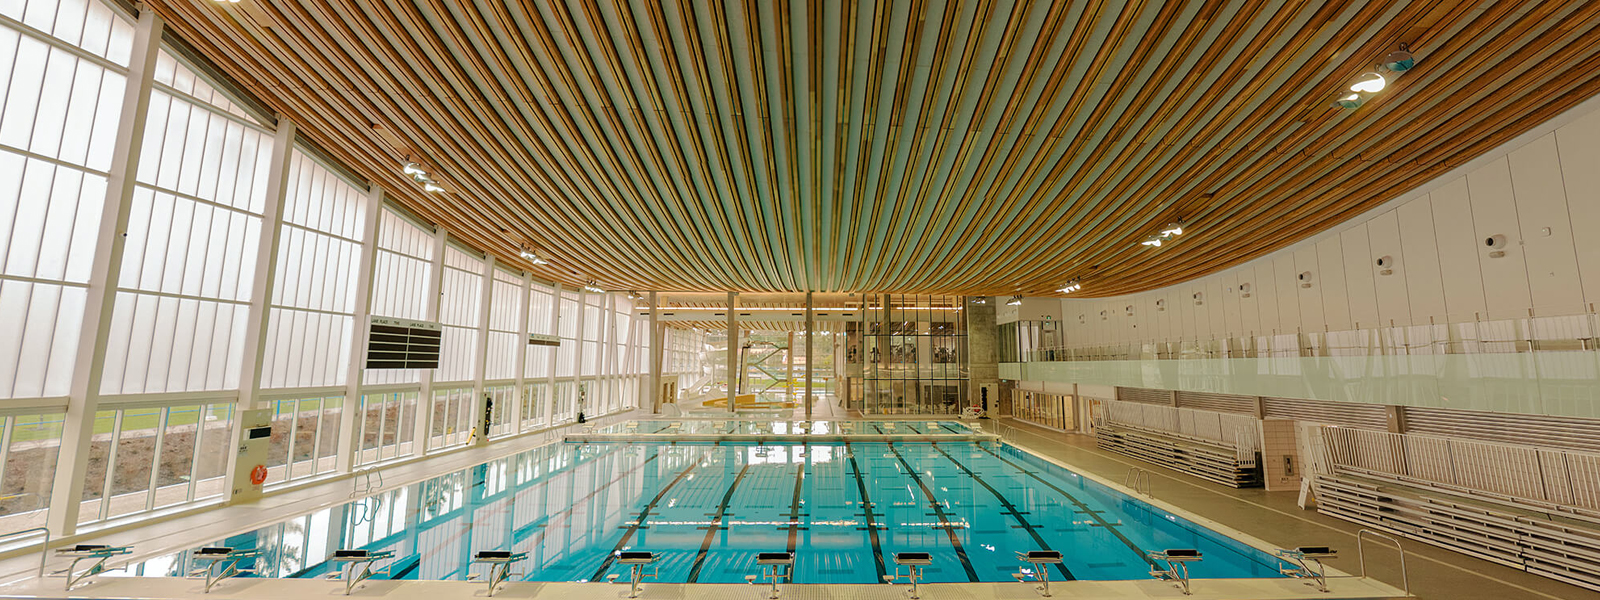 Grandview Heights Aquatic Centre Catenary Wood Structure Roof